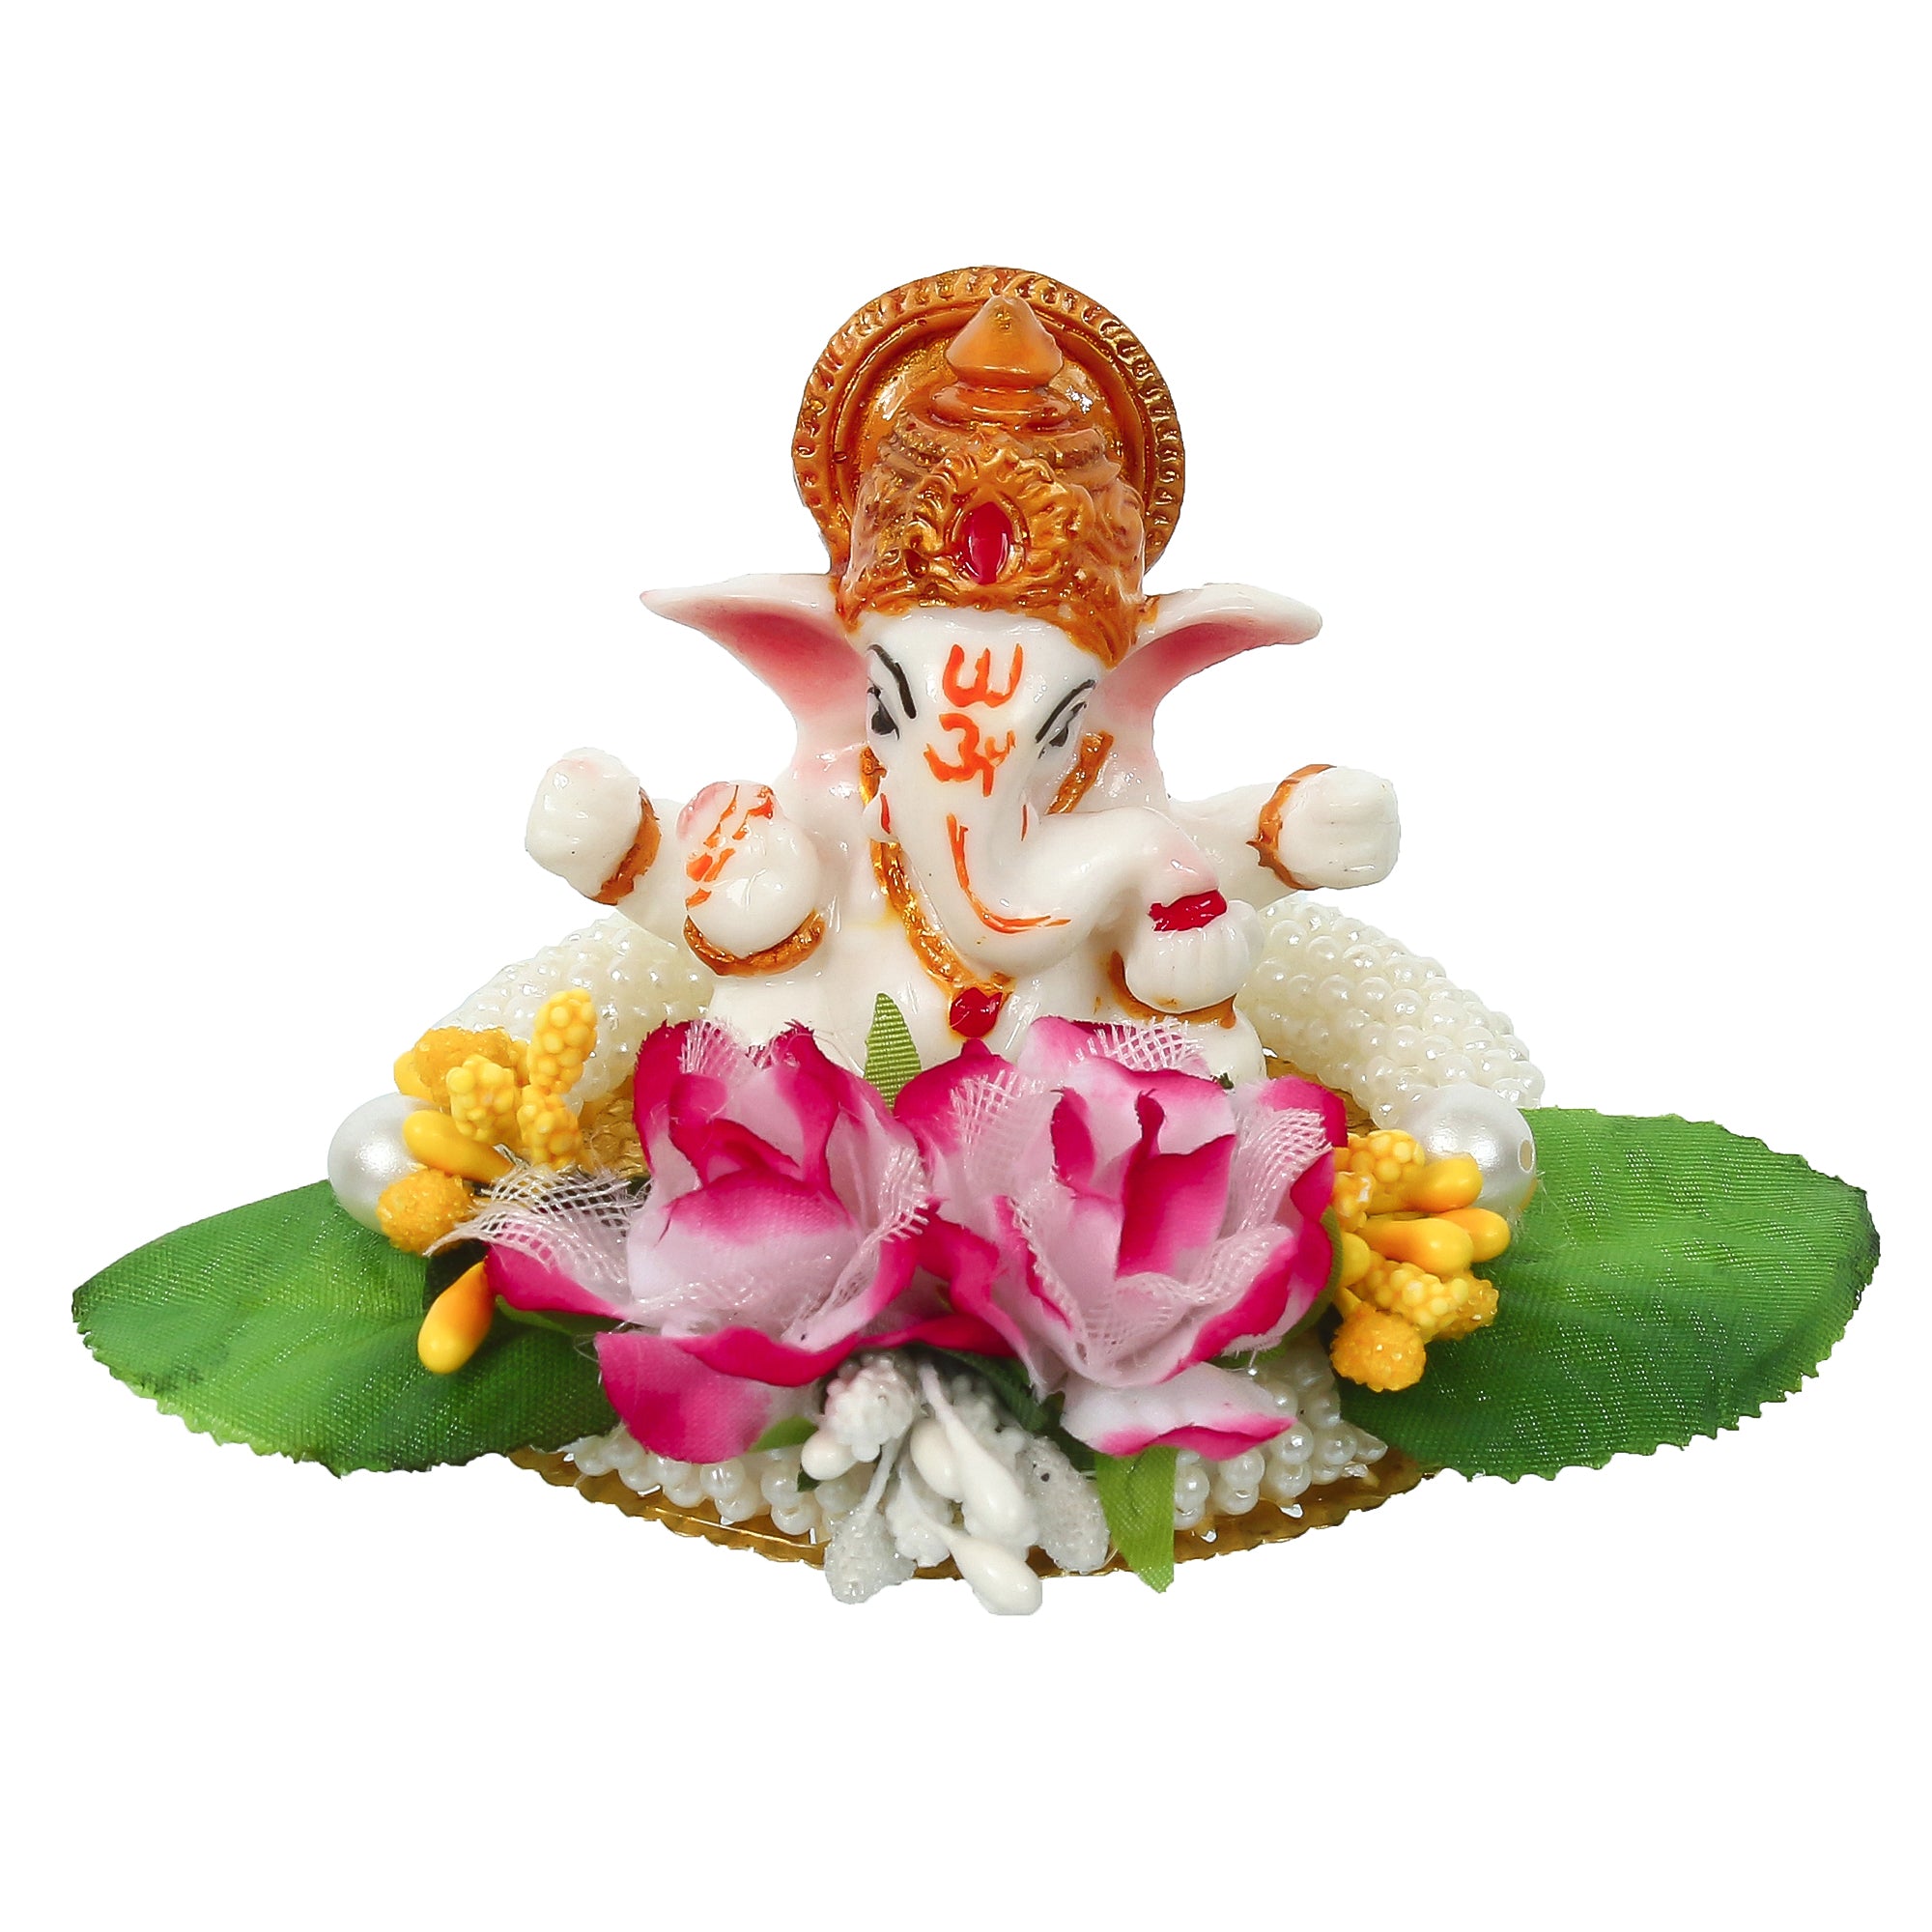 Lord Ganesha Idol on Decorative Handcrafted Plate with Colorful Flowers and Leaf 2